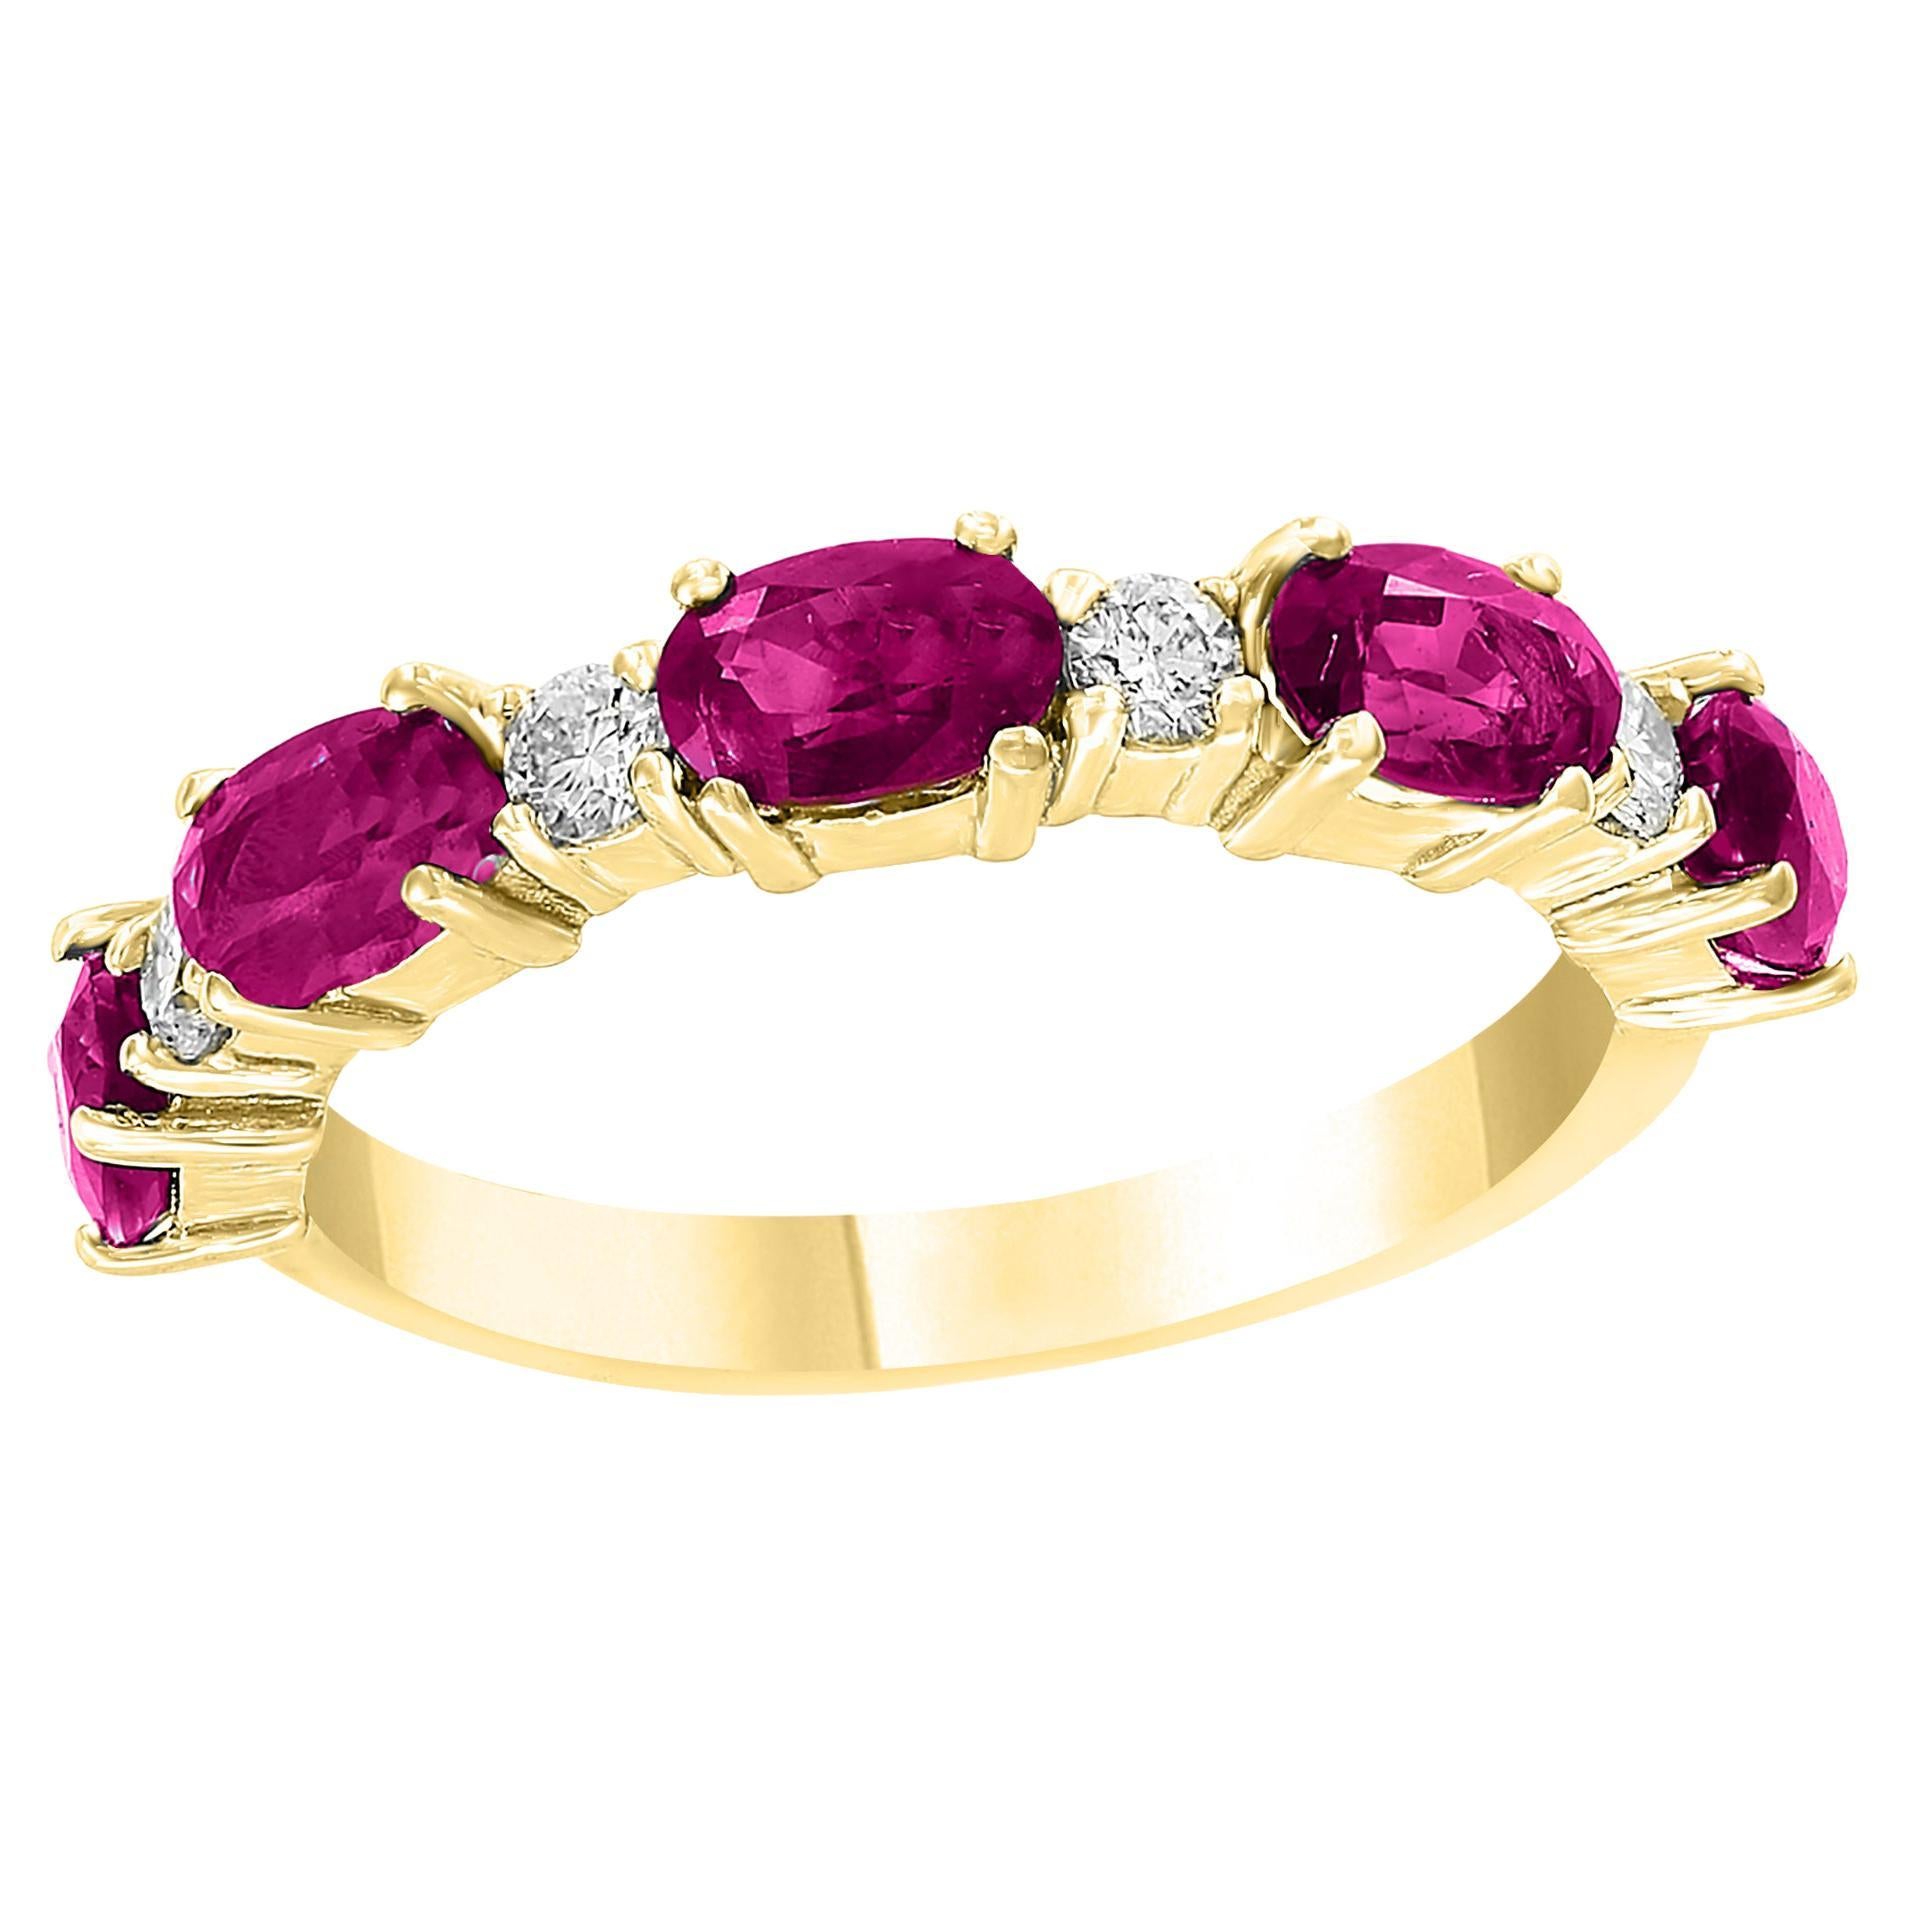 1.22 Carat Oval Cut Alternating Ruby Diamond Wedding Band in 14K Yellow Gold For Sale